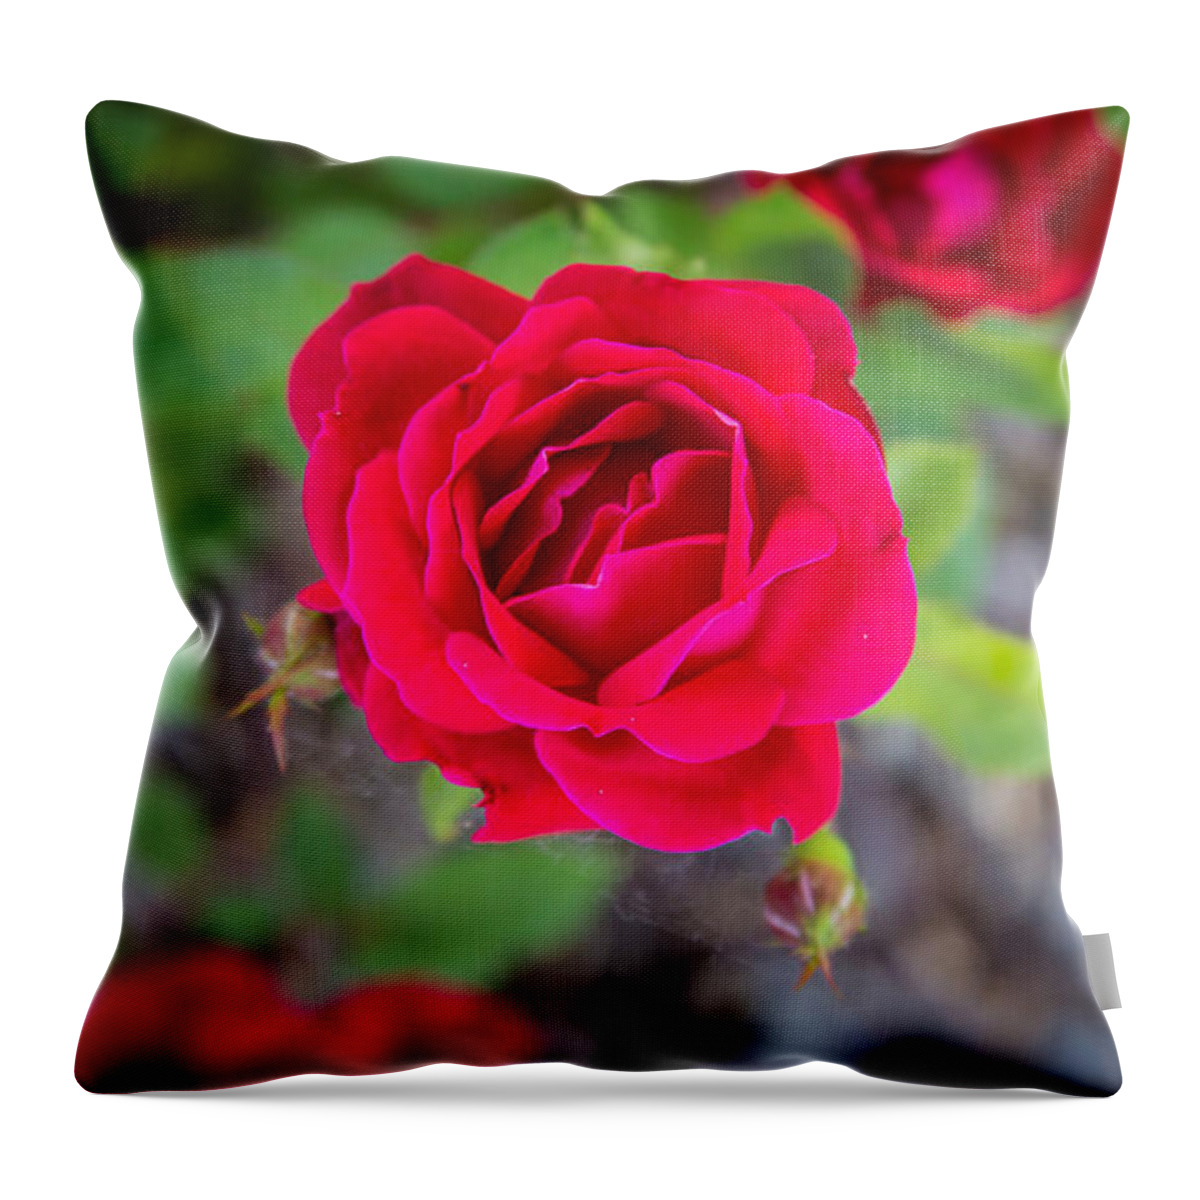 Flower Throw Pillow featuring the photograph Blooming Rose by Andrew Slater